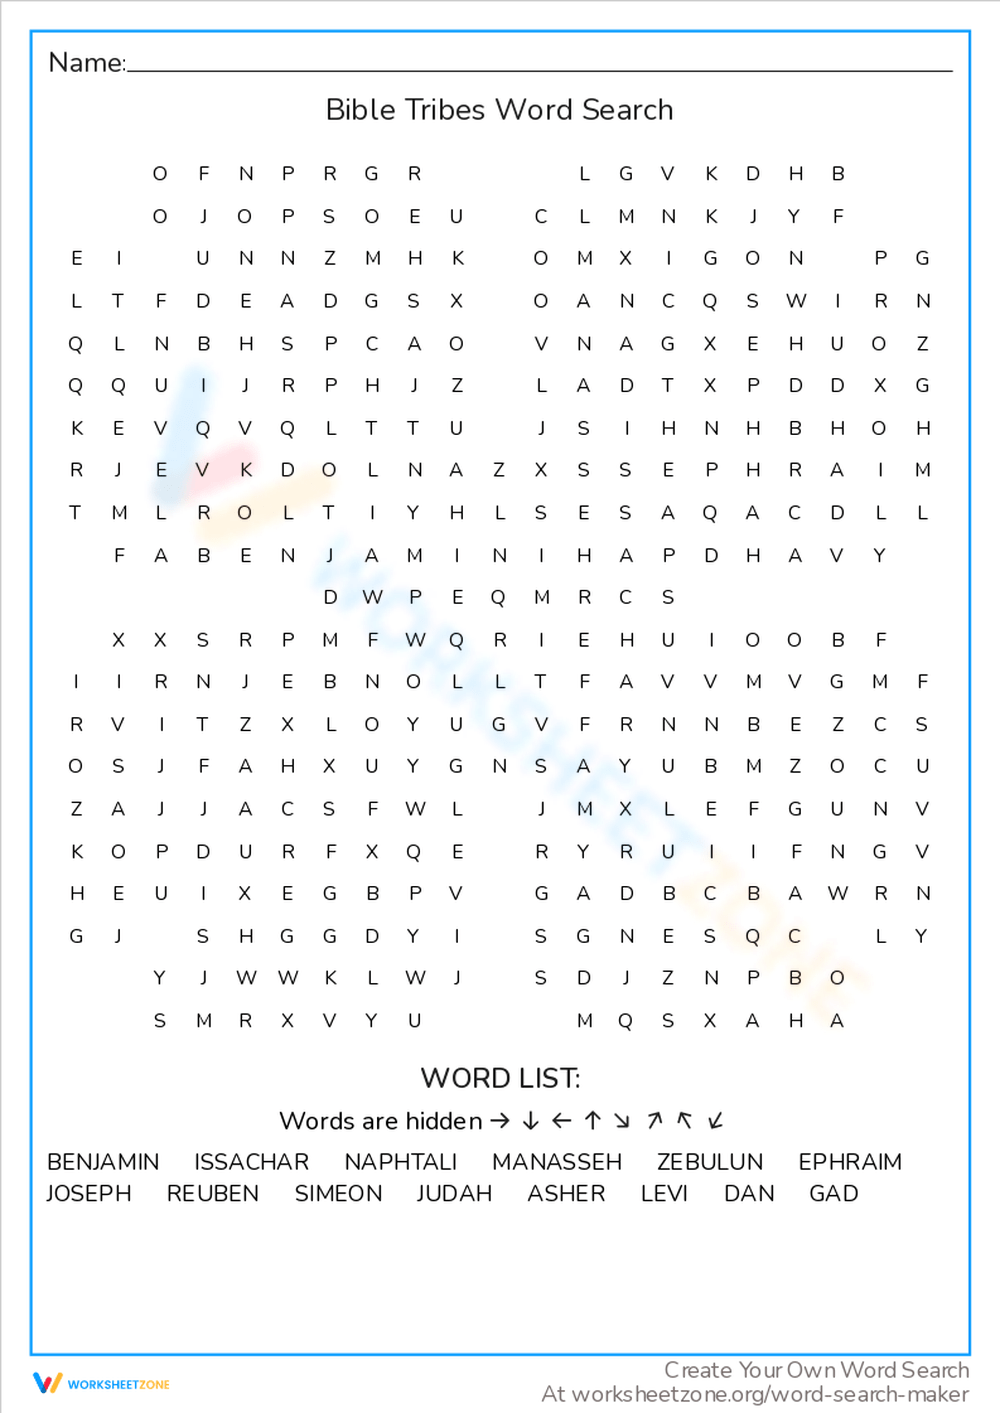 Bible Tribes Word Search Worksheet